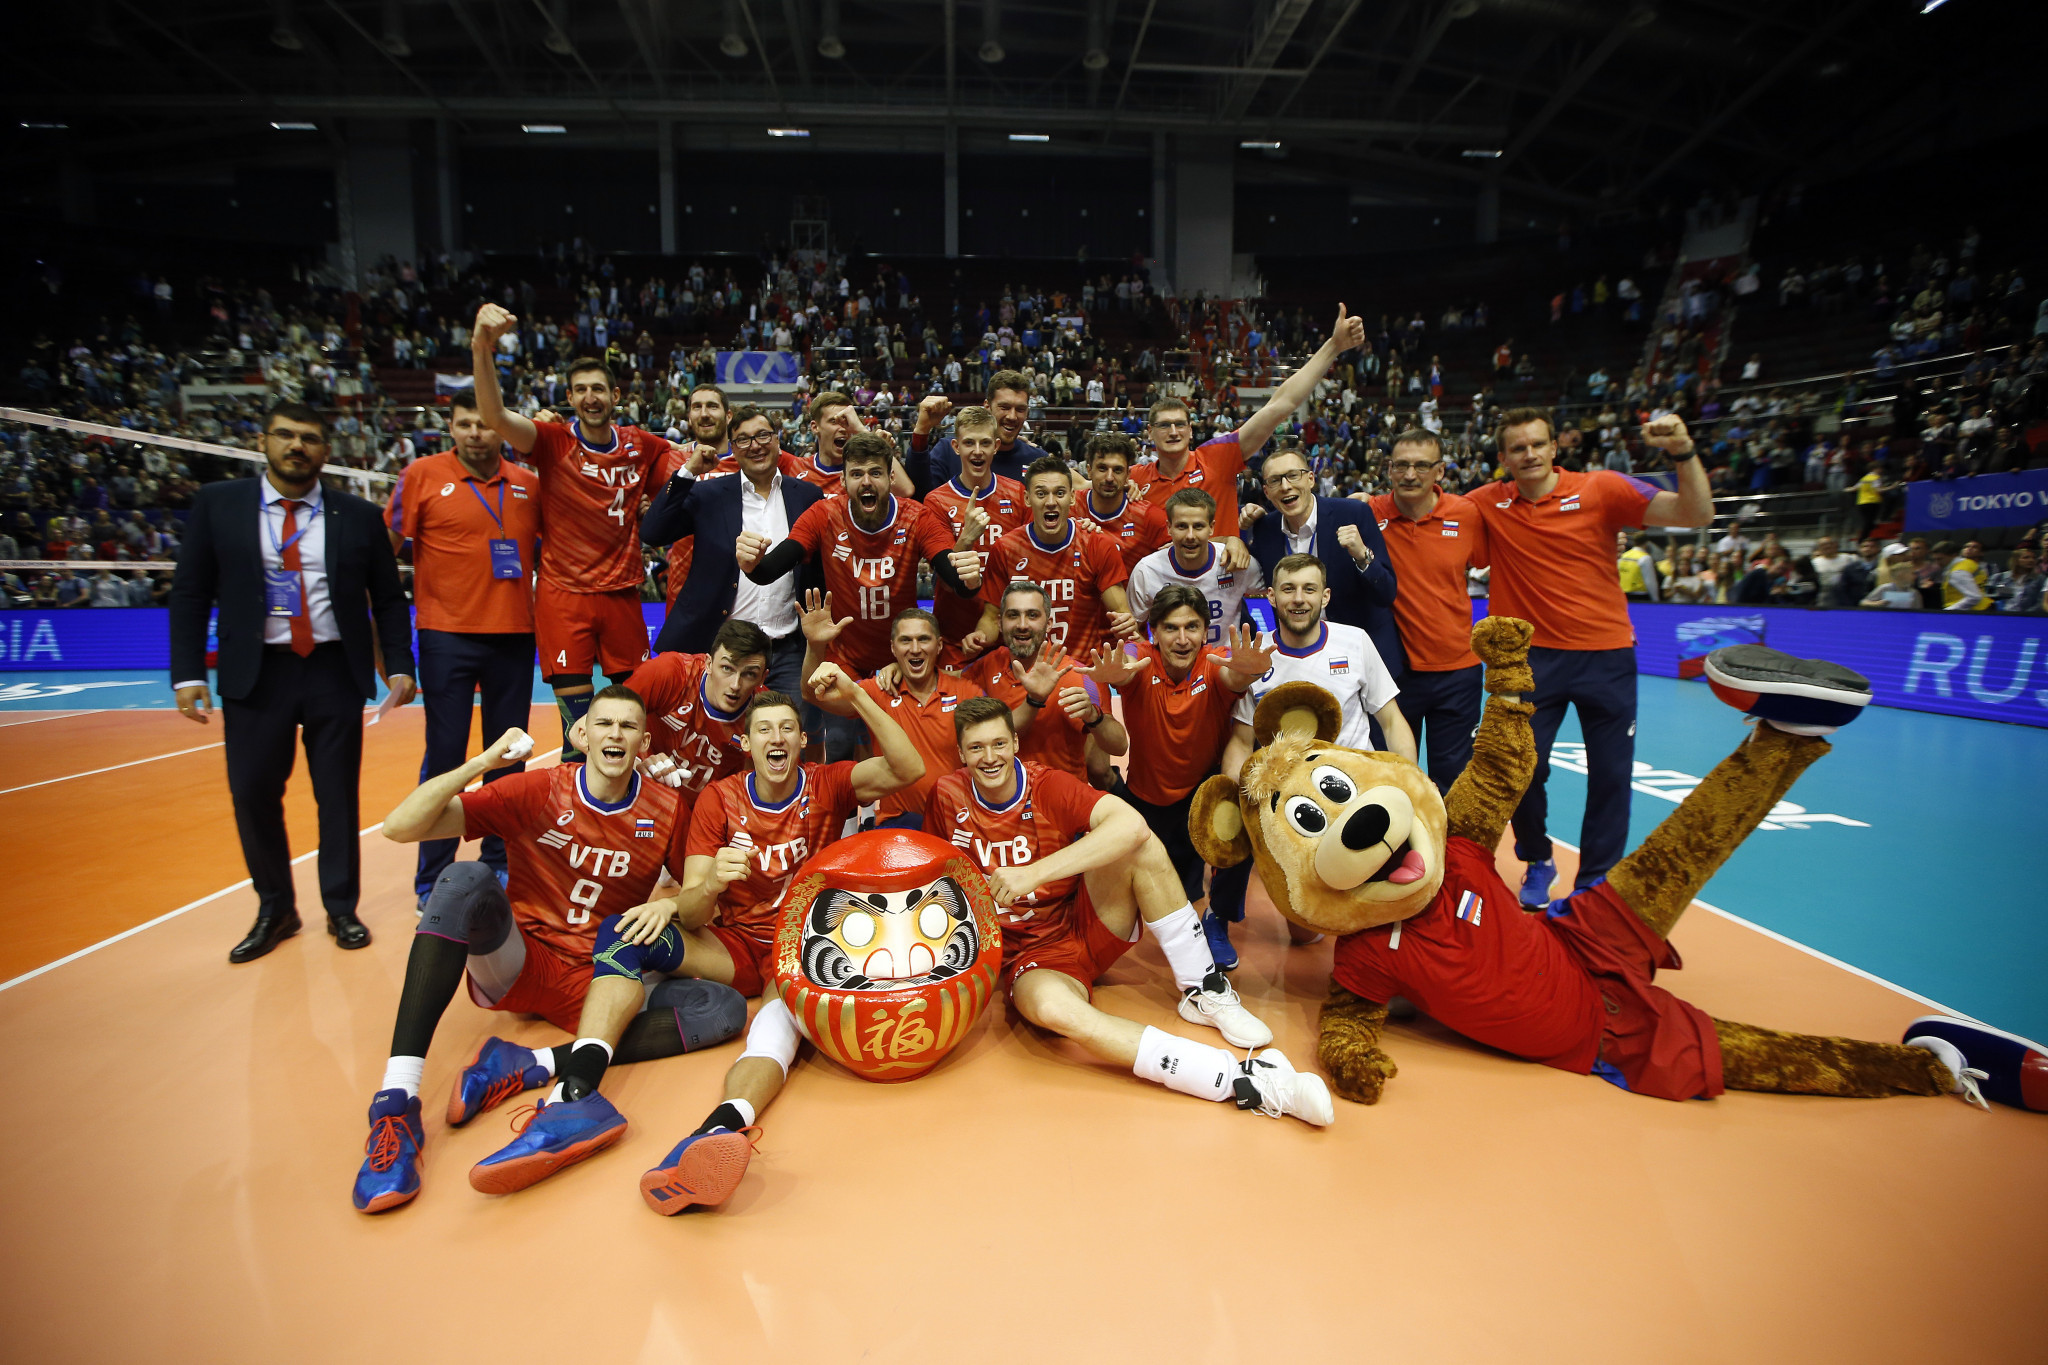 European champions Russia defeated Iran in straight sets to earn their place at Tokyo 2020 ©FIVB 